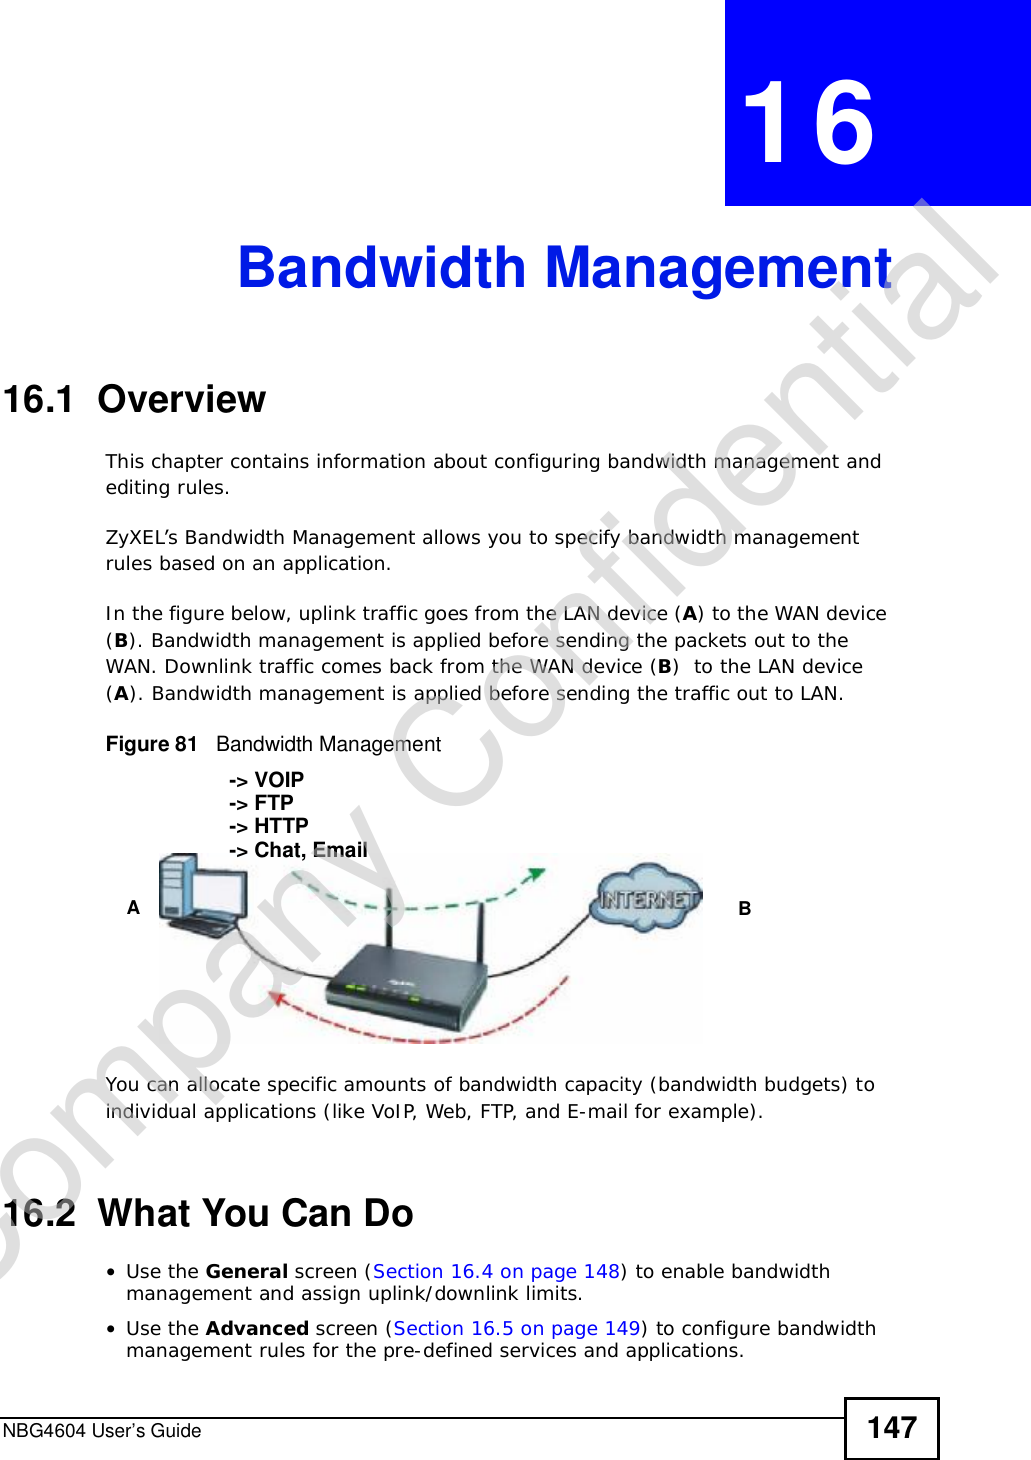 NBG4604 User’s Guide 147CHAPTER 16Bandwidth Management16.1  Overview This chapter contains information about configuring bandwidth management and editing rules.ZyXEL’s Bandwidth Management allows you to specify bandwidth management rules based on an application. In the figure below, uplink traffic goes from the LAN device (A) to the WAN device (B). Bandwidth management is applied before sending the packets out to the WAN. Downlink traffic comes back from the WAN device (B)  to the LAN device (A). Bandwidth management is applied before sending the traffic out to LAN.Figure 81   Bandwidth ManagementYou can allocate specific amounts of bandwidth capacity (bandwidth budgets) to individual applications (like VoIP, Web, FTP, and E-mail for example).16.2  What You Can Do•Use the General screen (Section 16.4 on page 148) to enable bandwidth management and assign uplink/downlink limits.•Use the Advanced screen (Section 16.5 on page 149) to configure bandwidth management rules for the pre-defined services and applications.AB-&gt; VOIP-&gt; FTP-&gt; HTTP-&gt; Chat, EmailCompany Confidential